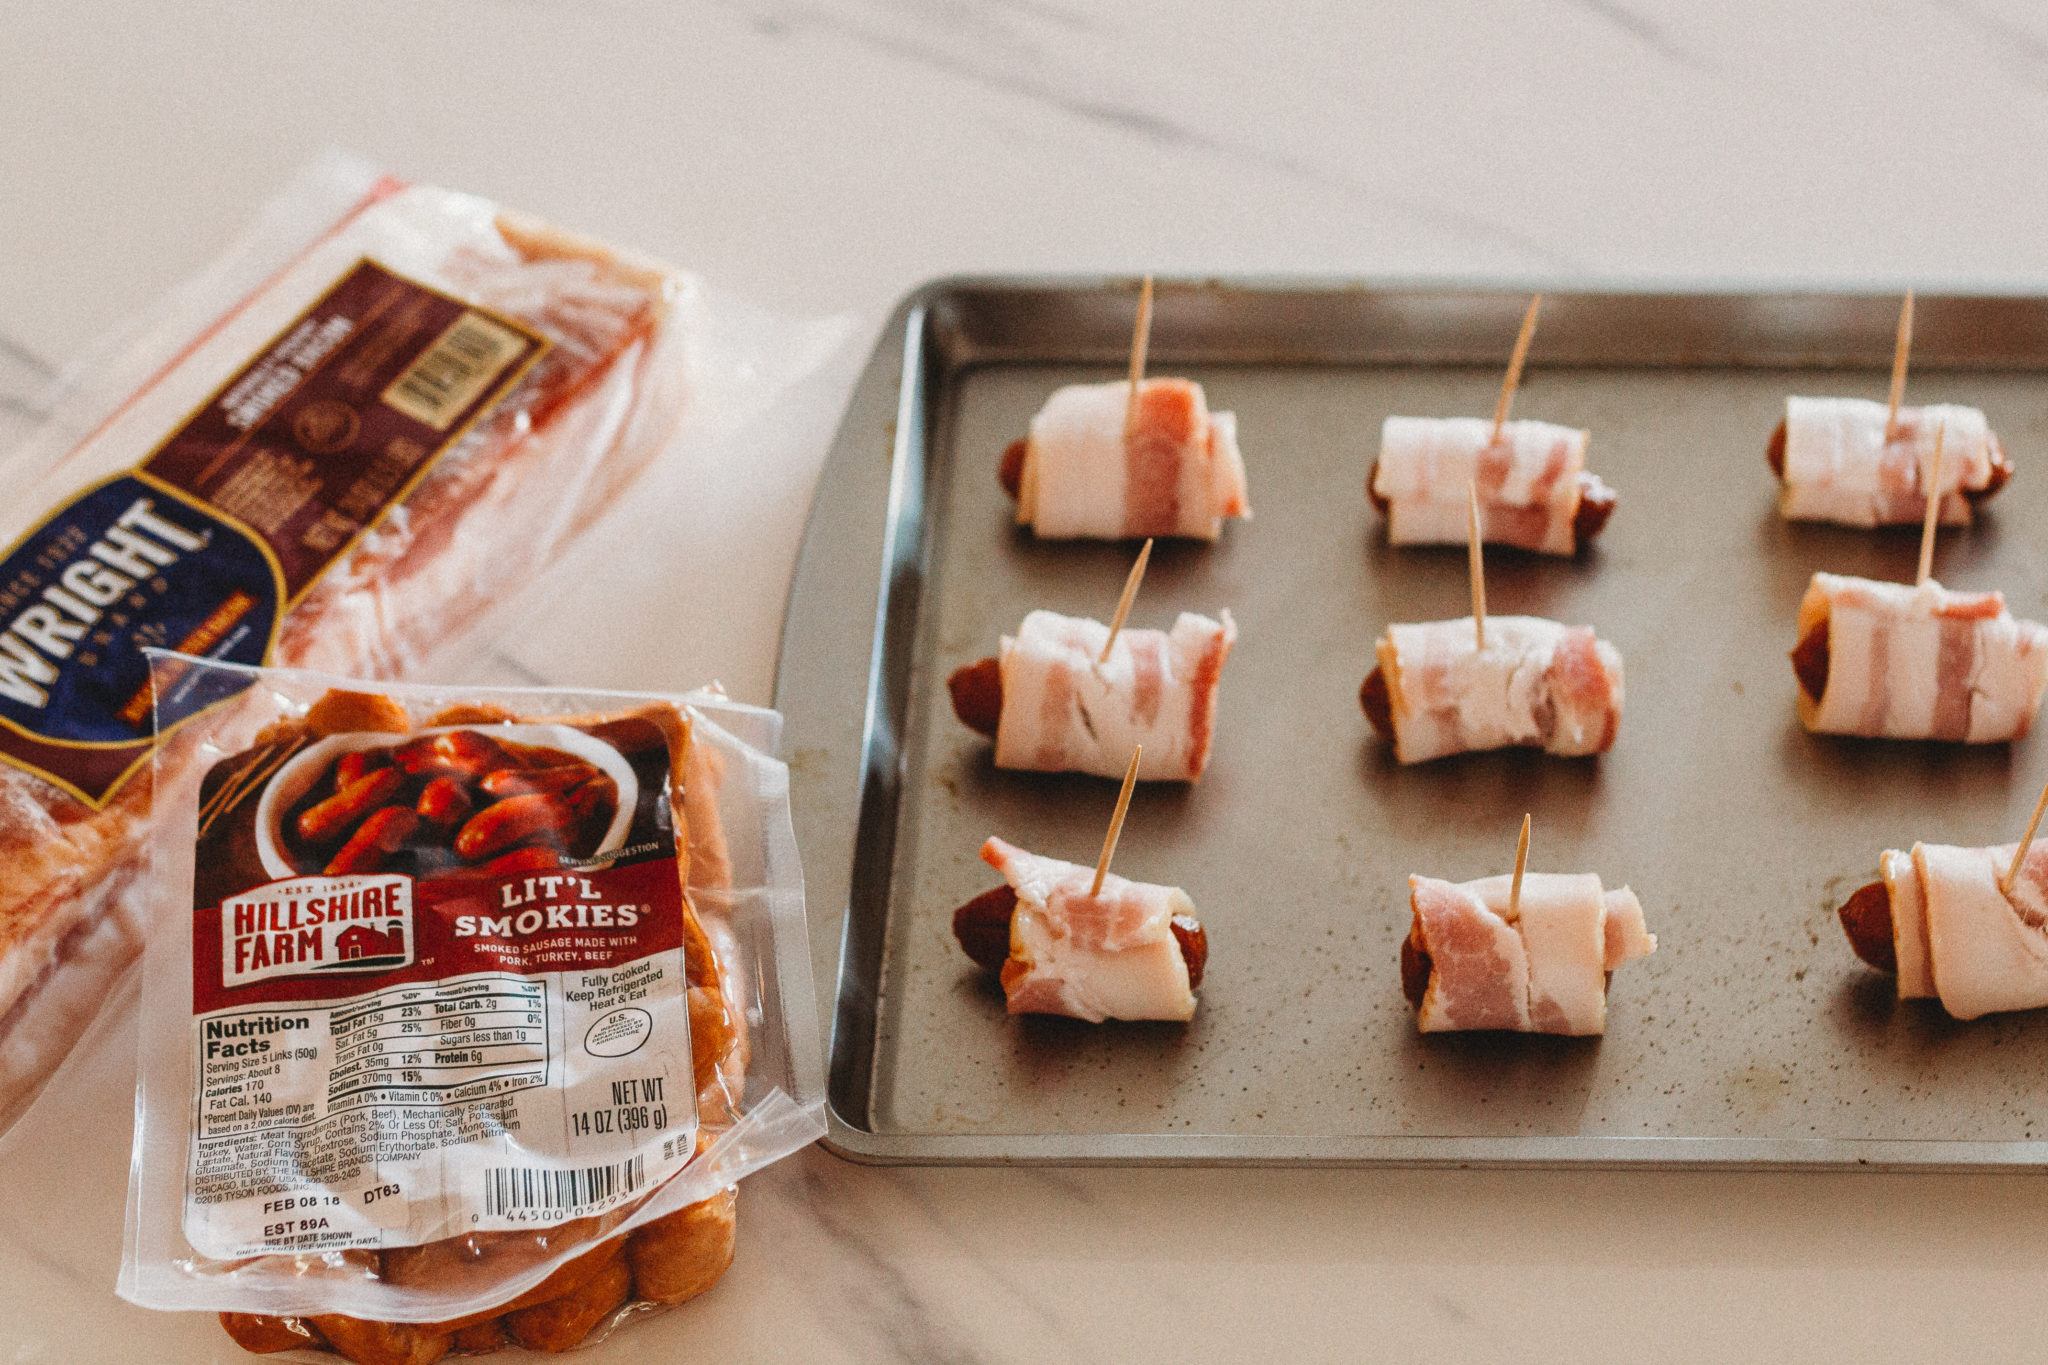 Celebrate the Big Game with quick and easy appetizers like this fun take on the jalapeno popper using Litl Smokies sausages wrapped in bacon and topped with cheddar cheese and jalapeno. #ad #TysonWinningLineup #Walmart